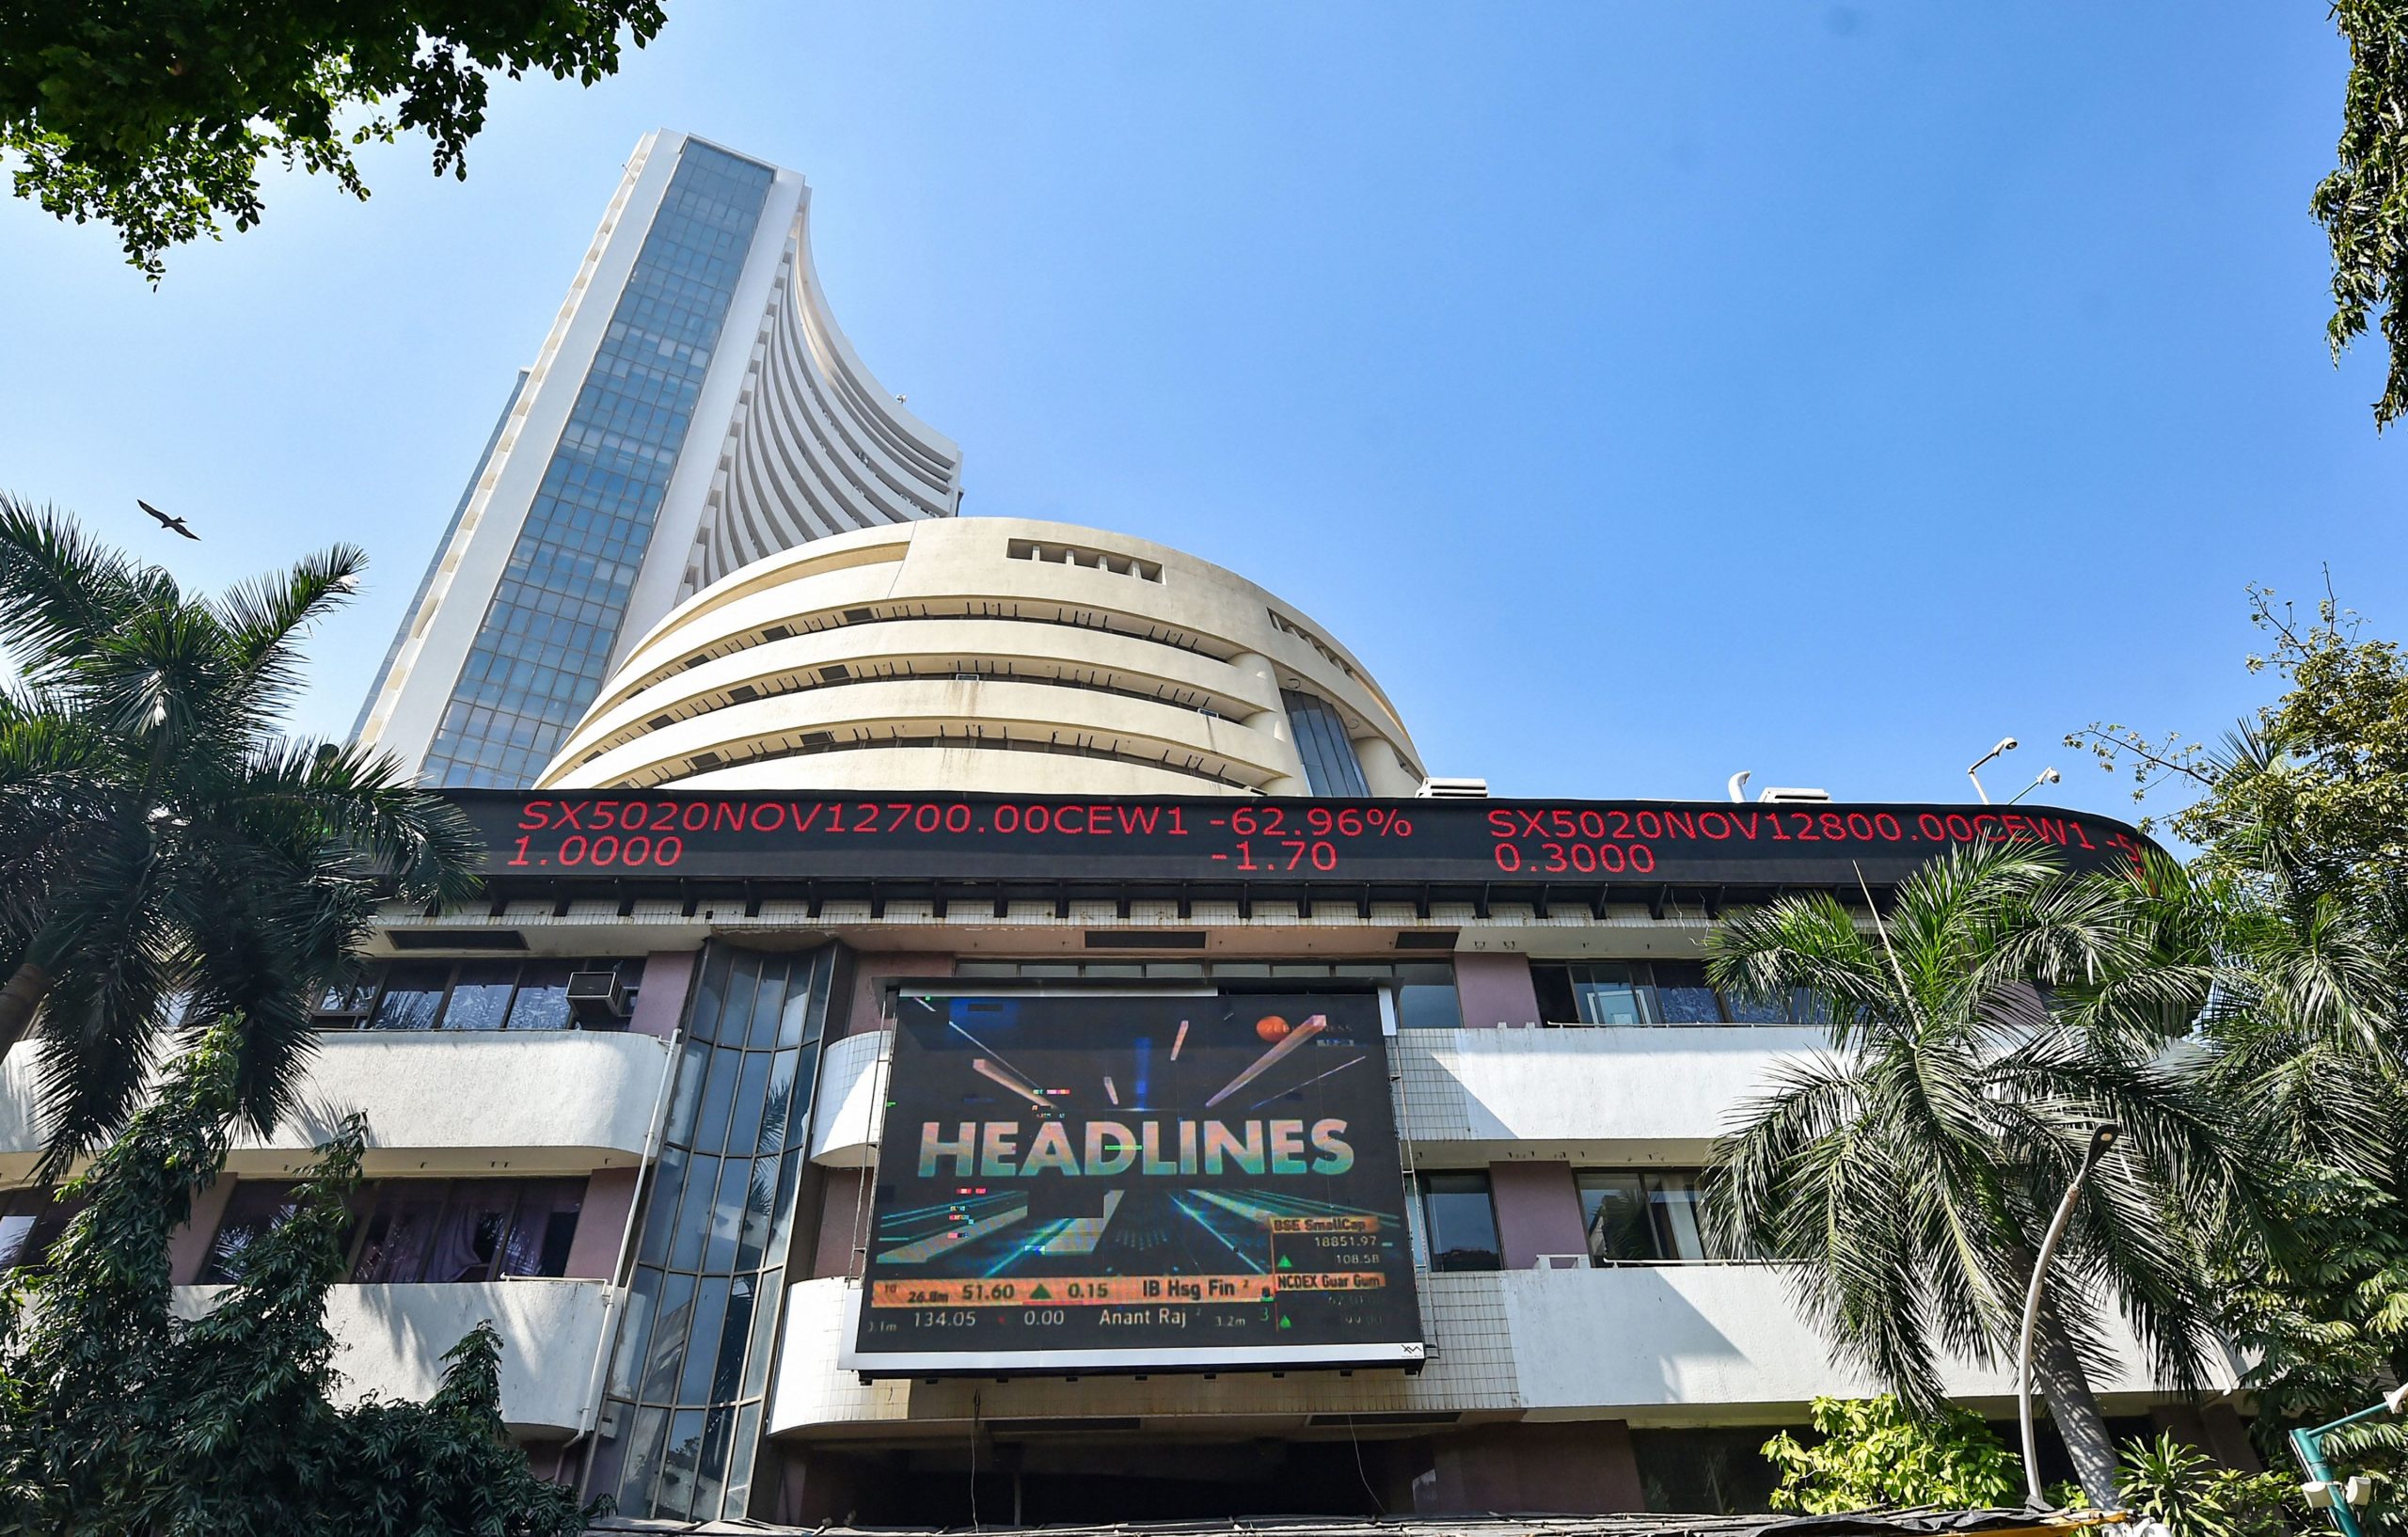 Trending Stocks: HDFC, Bajaj Auto, Dr Reddy’s and others in news today